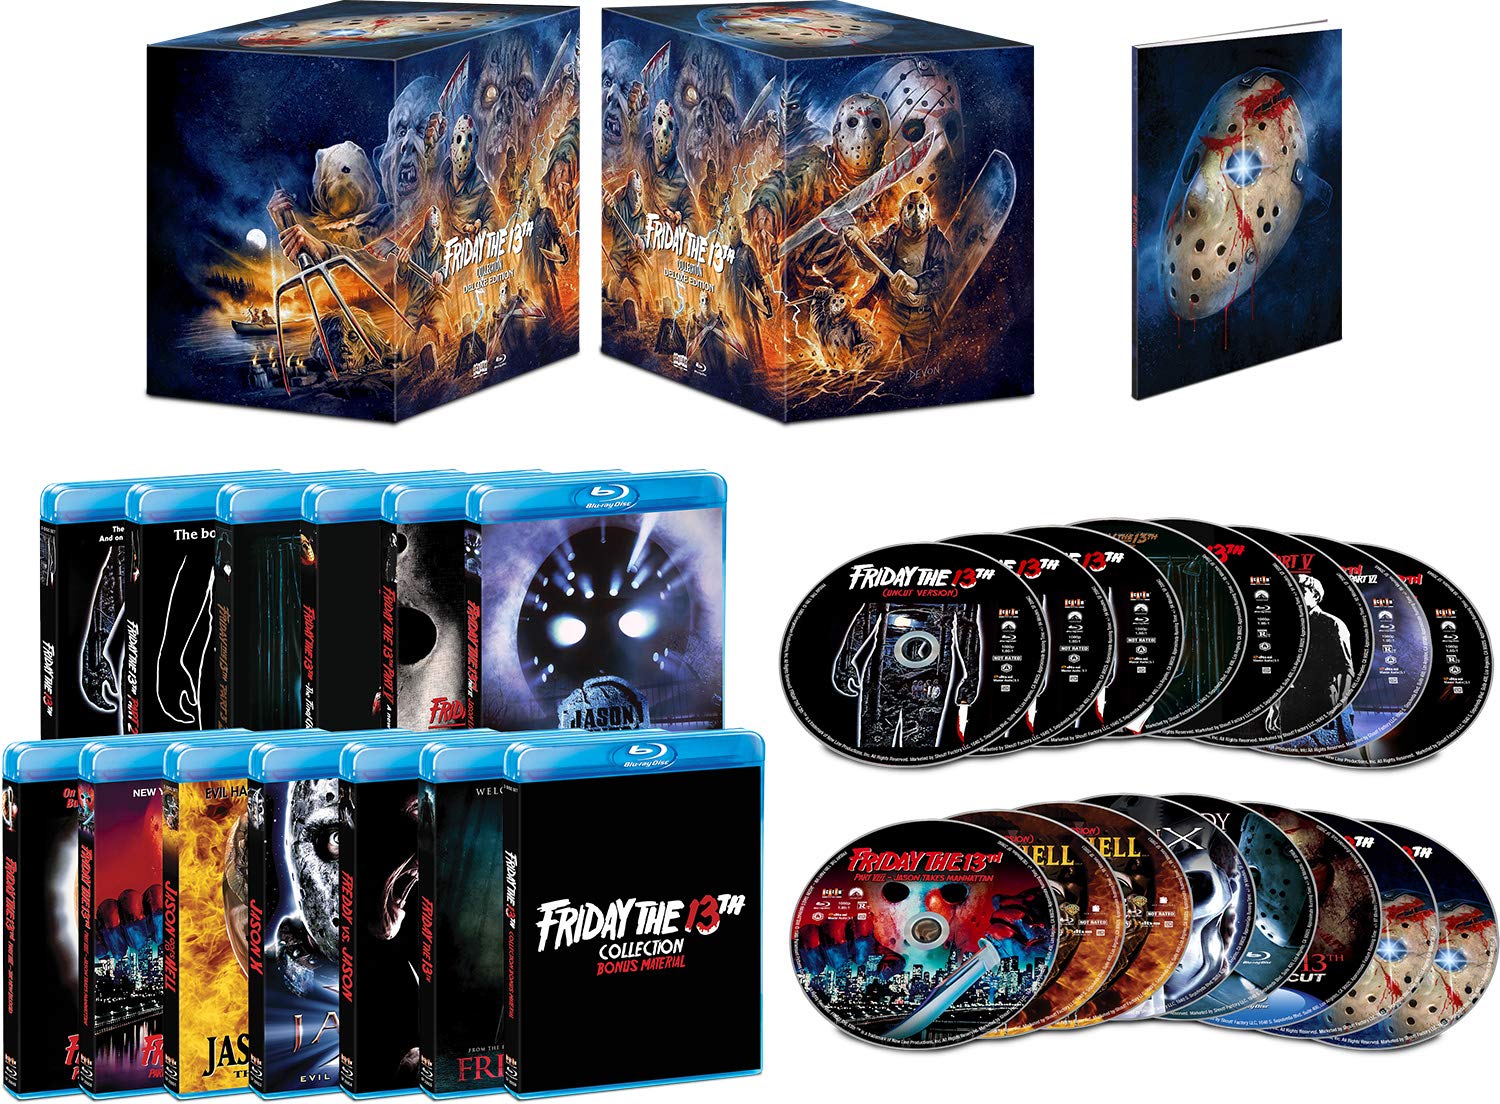 Friday the 13th Collection [Blu-ray] - Deluxe Edition $89.99